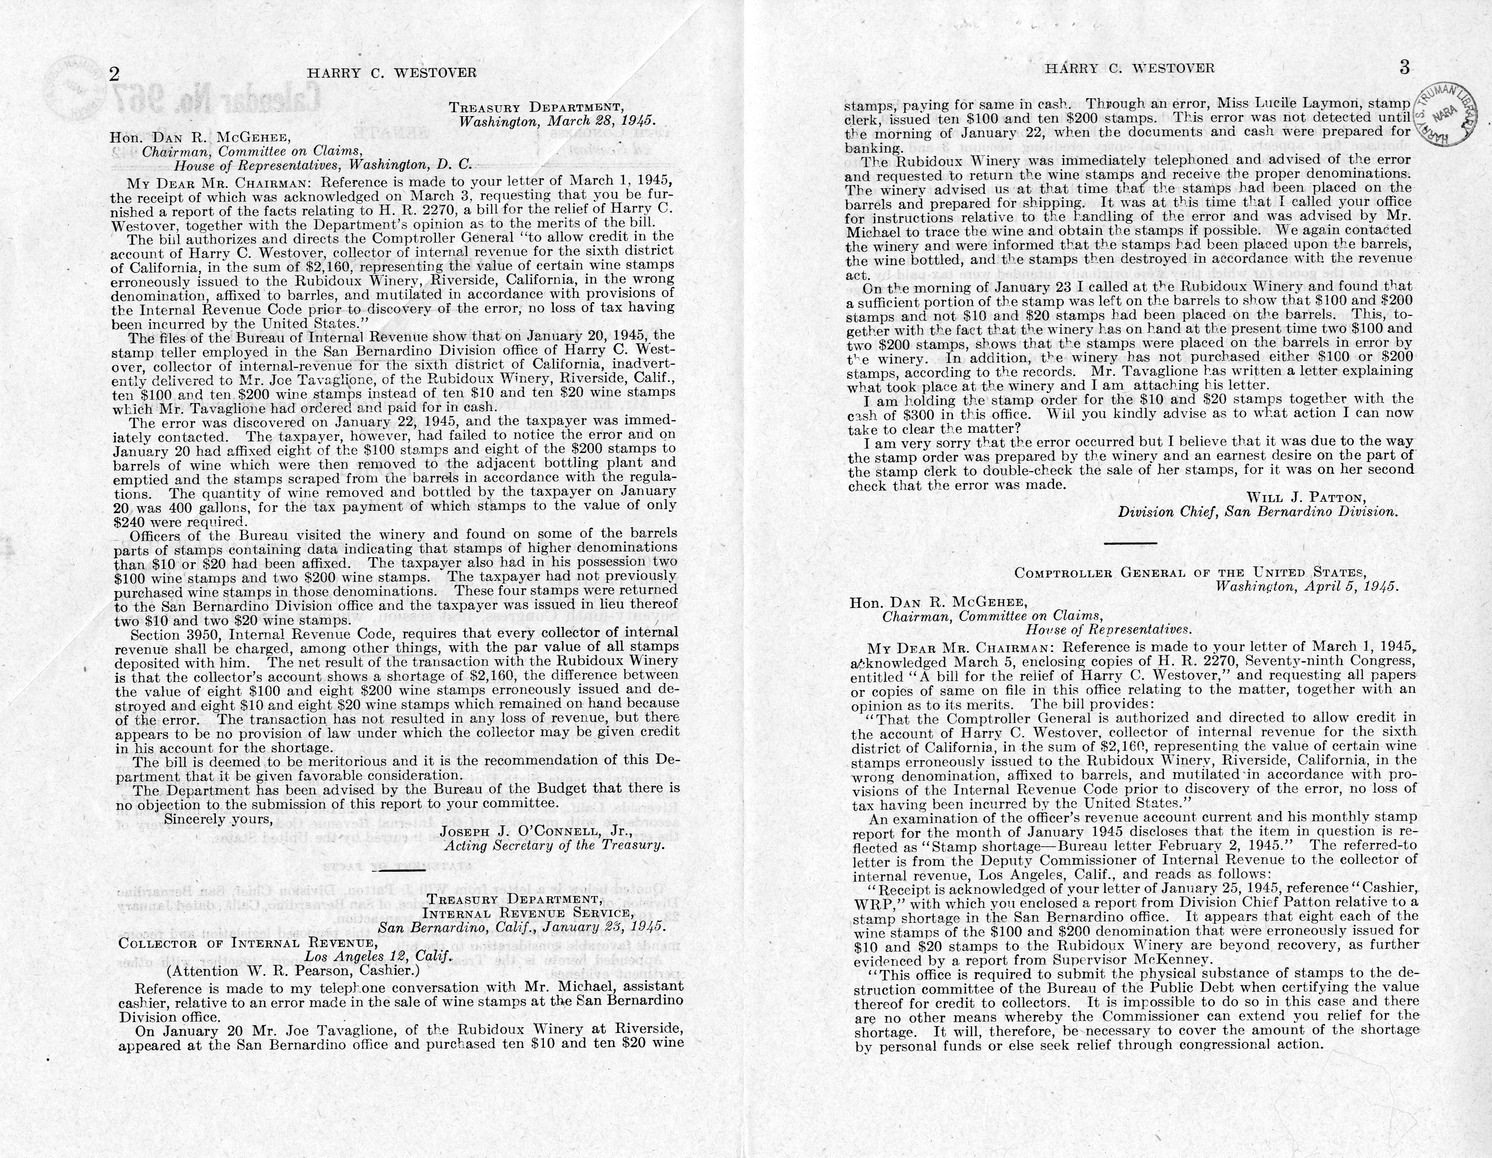 Memorandum from Frederick J. Bailey to M. C. Latta, H. R. 2270, For the Relief of Harry C. Westover, with Attachments